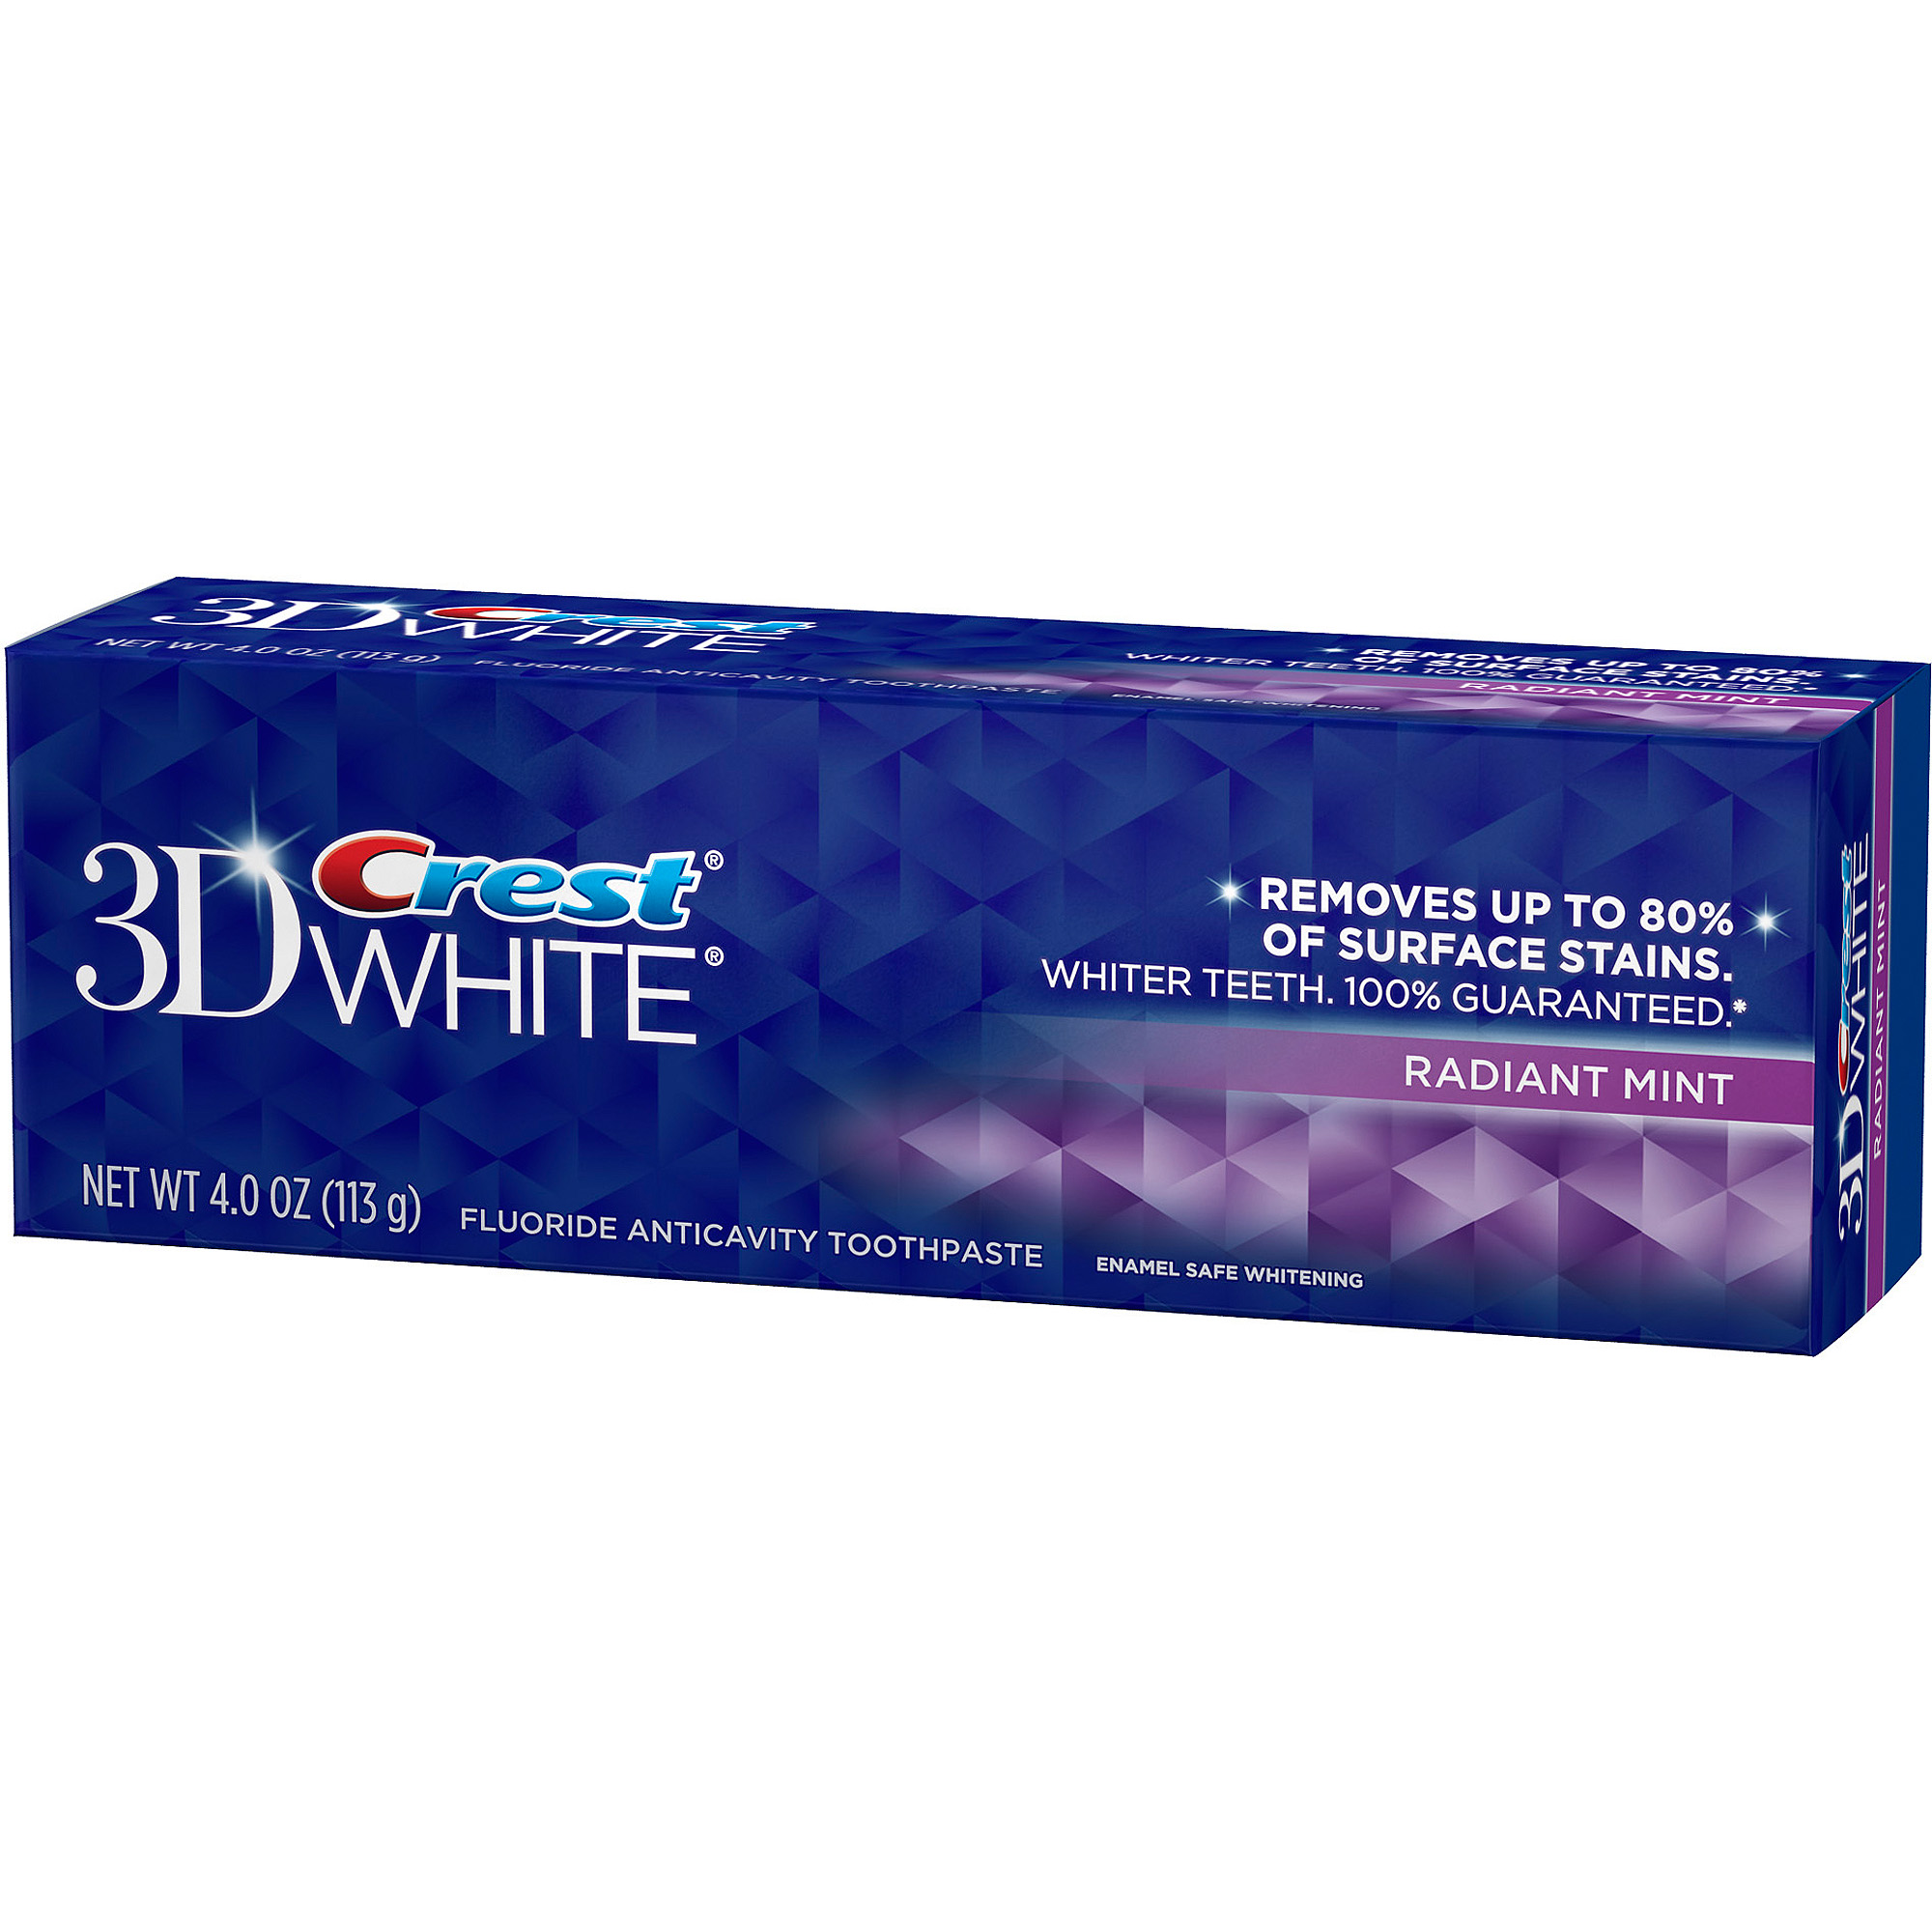 Crest 3D White Radiant Mint Whitening Toothpaste, 4 Oz - image 4 of 8